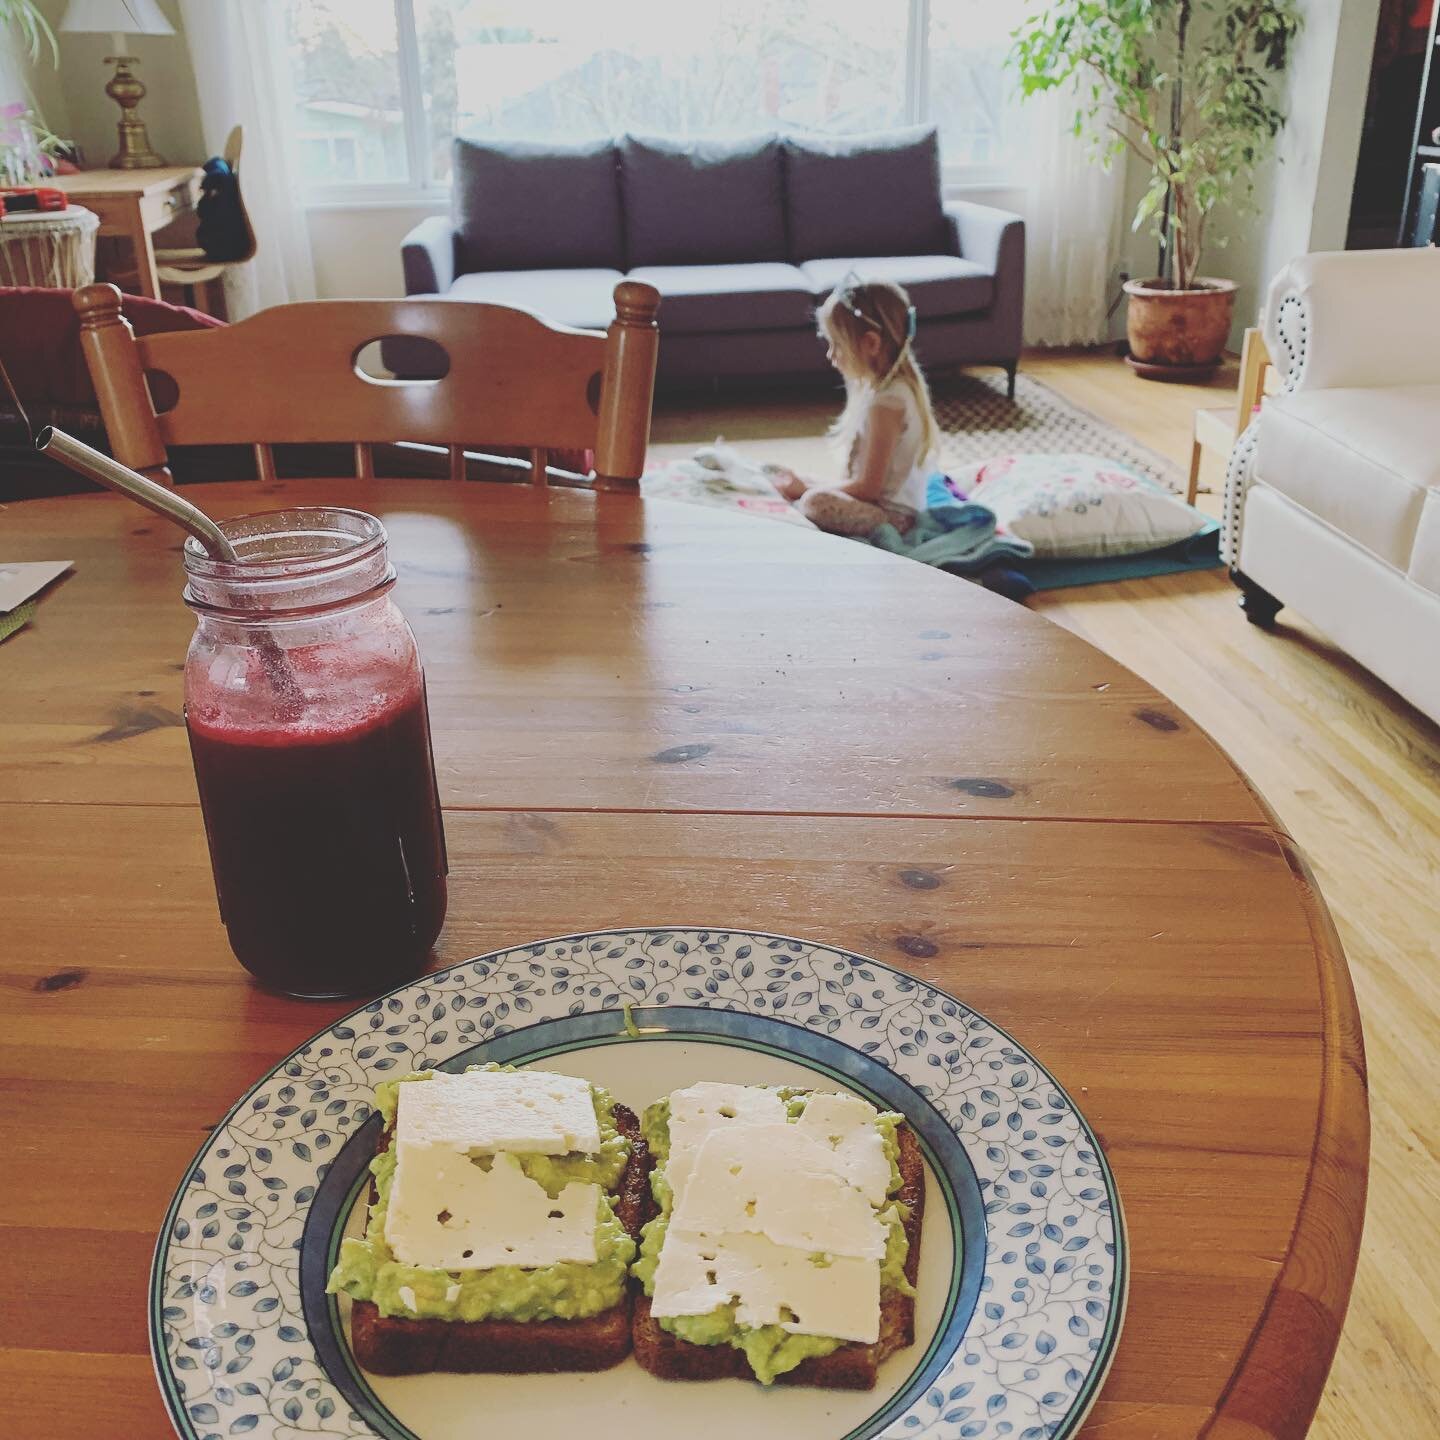 Can you say happy place? My Elsa-princess-yogi daughter asked for an episode of #cosmicyogaforkids Mama is in heaven - I get to sit an enjoy my fresh juice and avocado toast while watching my daughter do sun salutations - crown, cat ears, sparkly sho